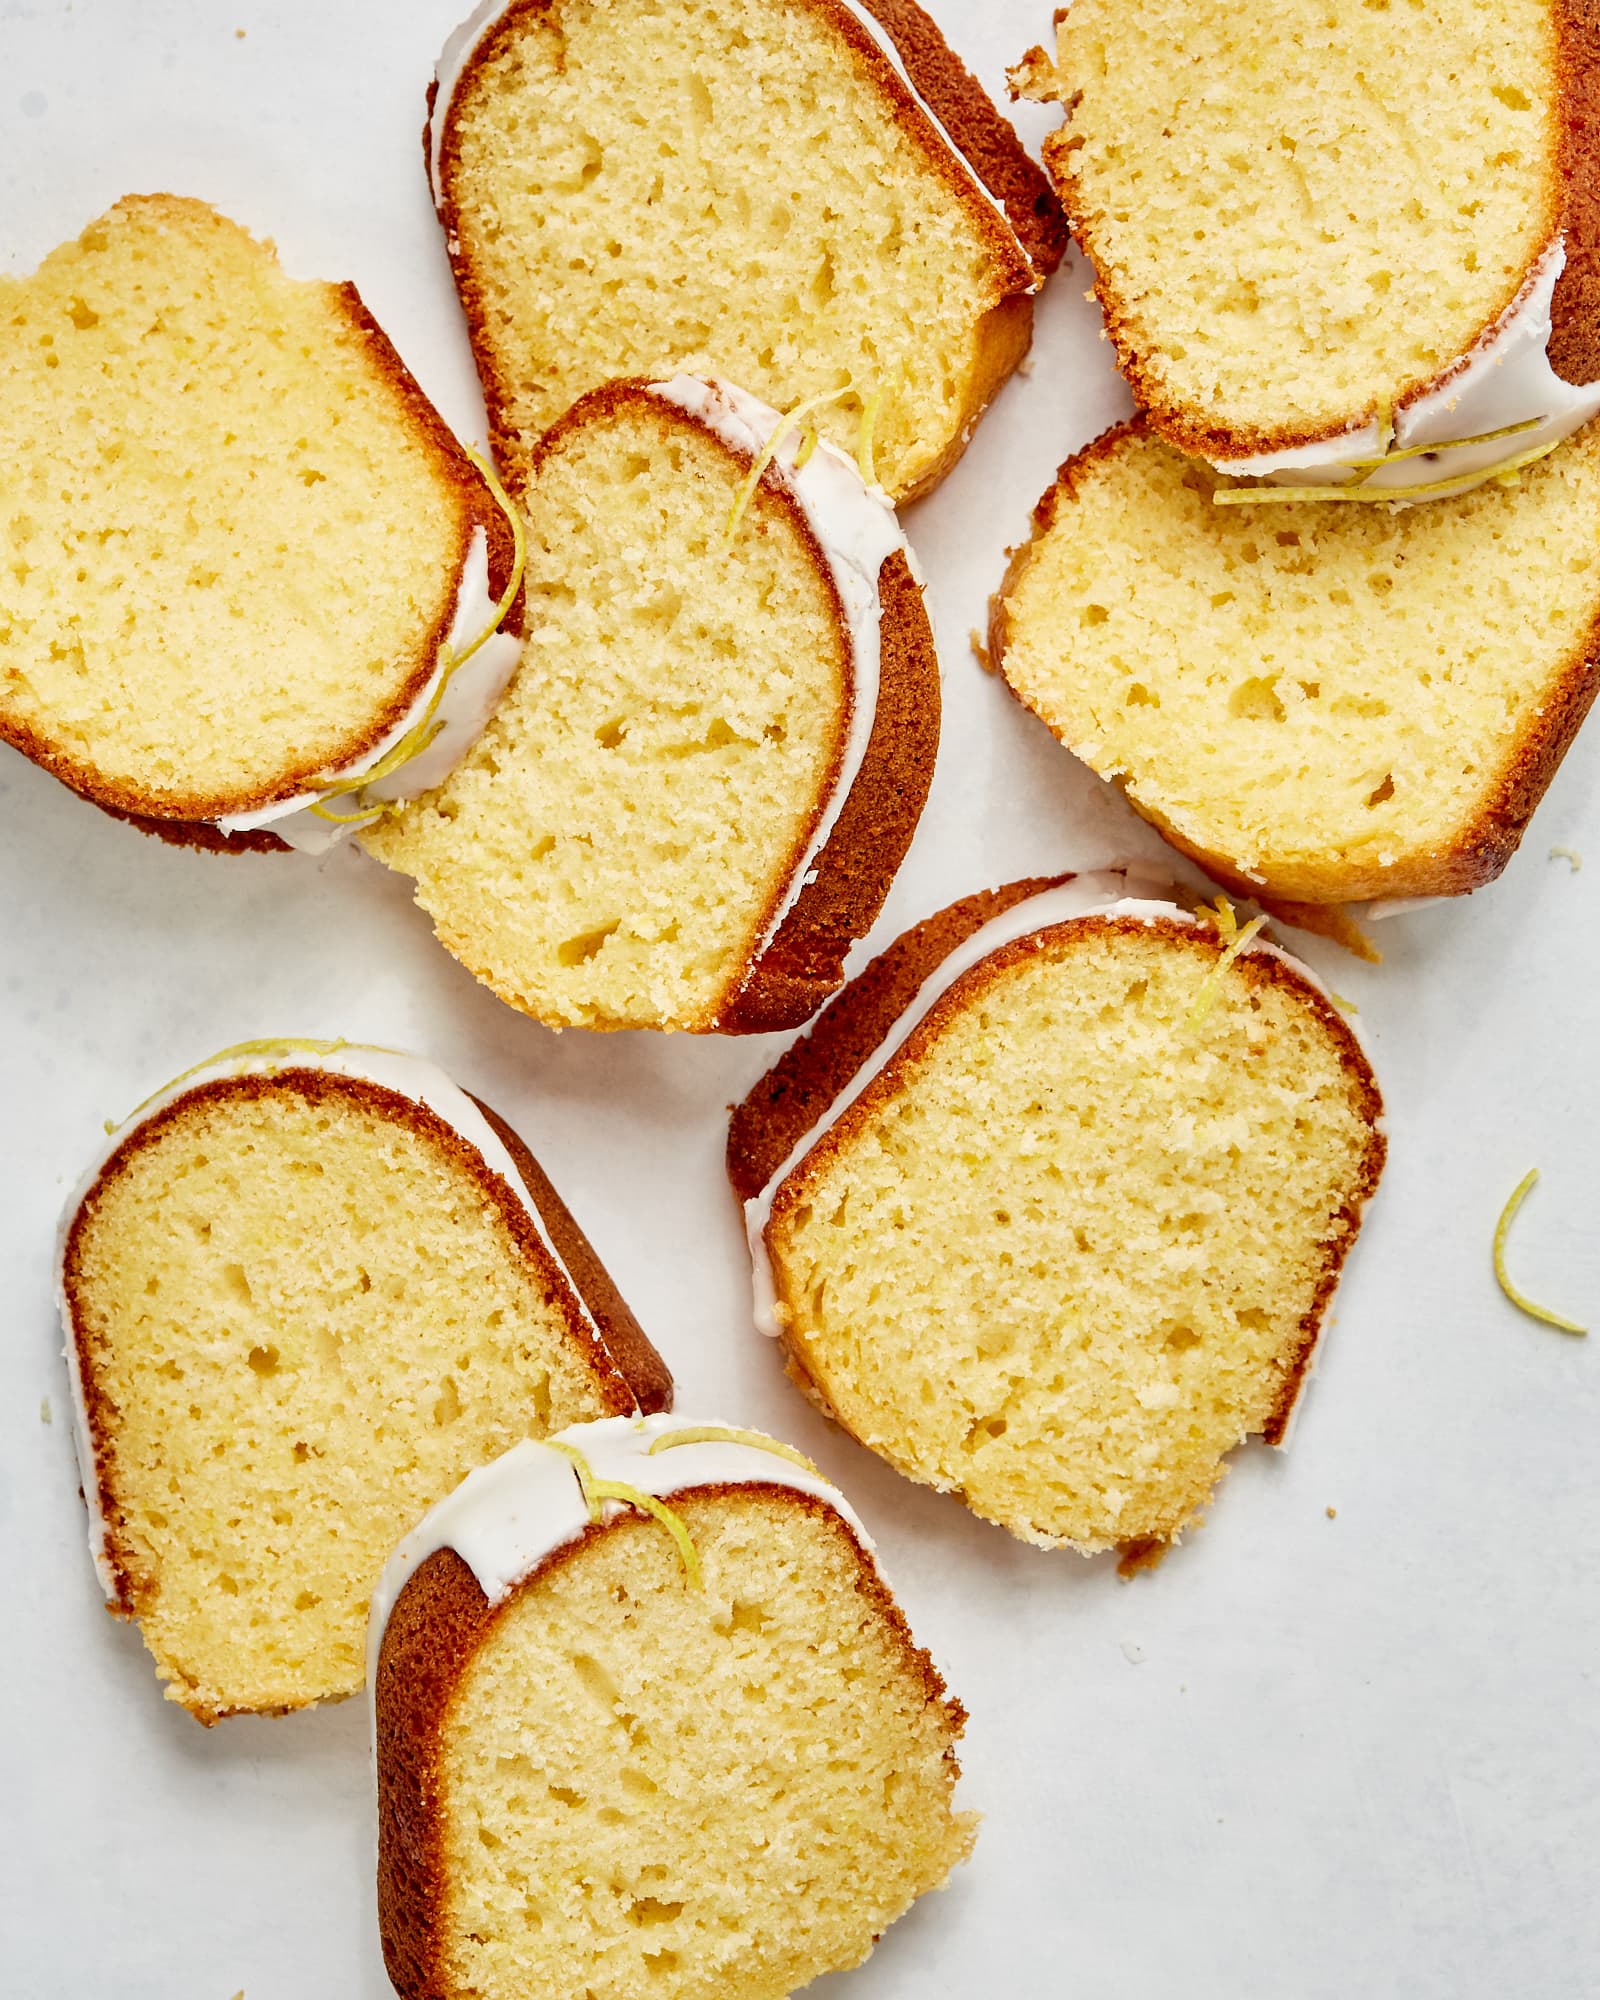 10 easy cakes made using olive oil